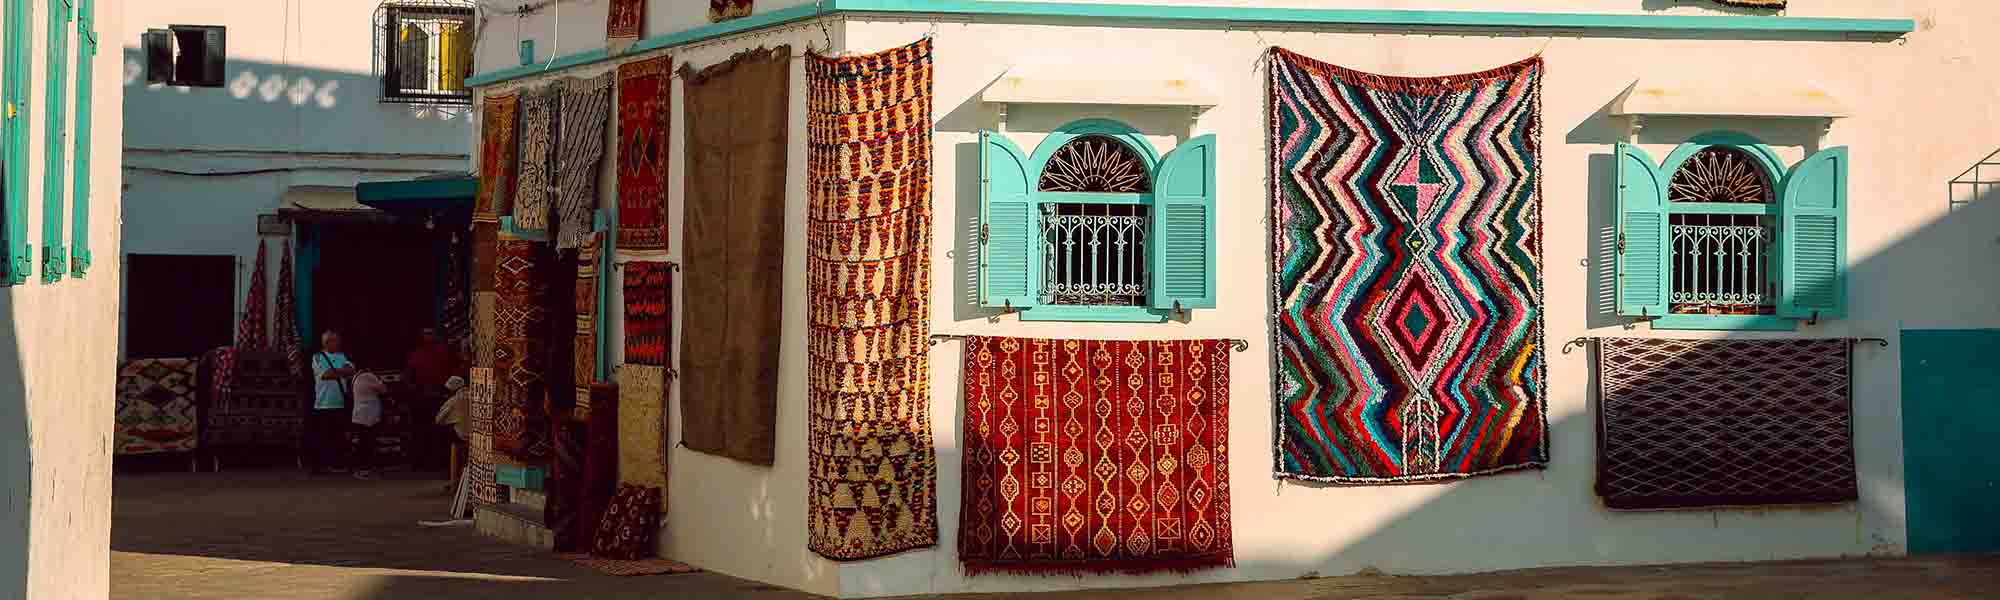 A large number of colorful handmade rugs hanging on the walls of houses